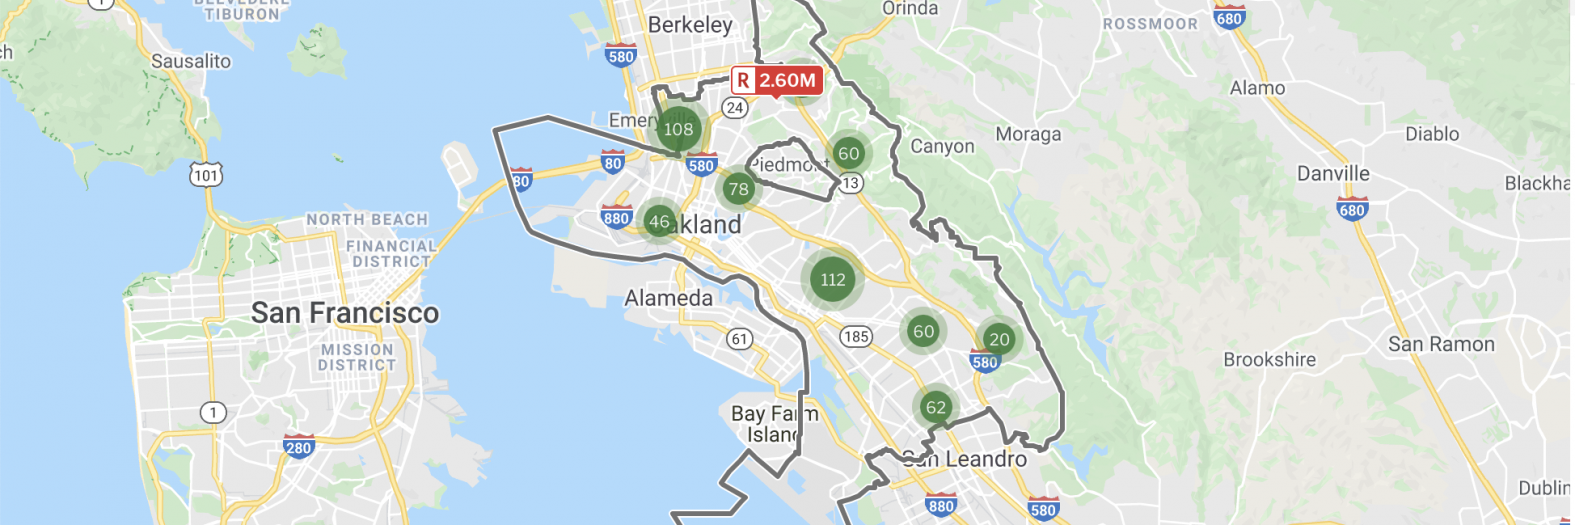 Redfin map of Oakland, CA